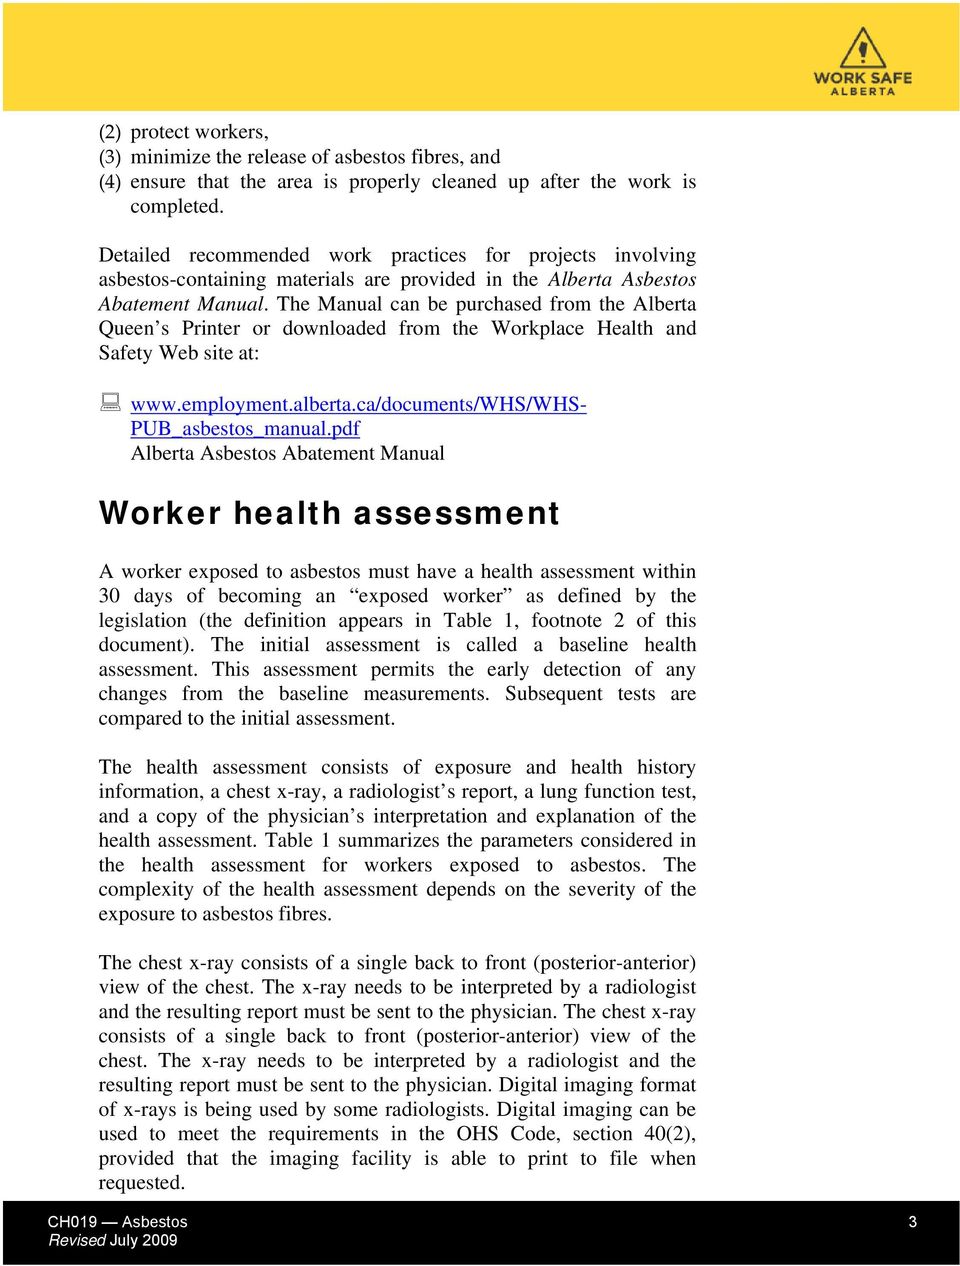 The Manual can be purchased from the Alberta Queen s Printer or downloaded from the Workplace Health and Safety Web site at: www.employment.alberta.ca/documents/whs/whs- PUB_asbestos_manual.